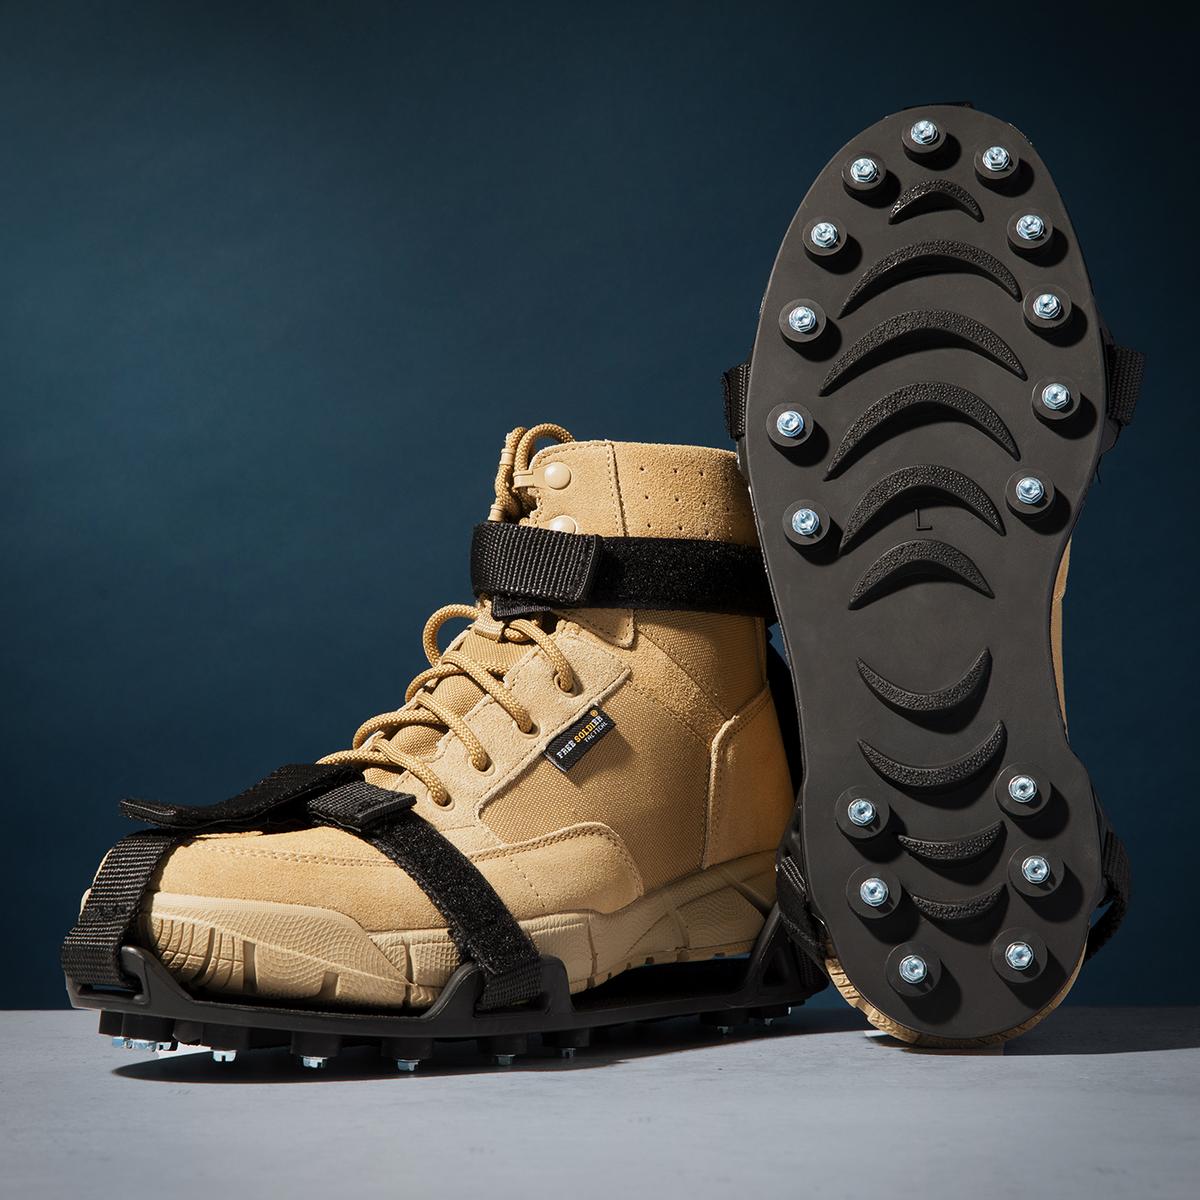 Action Traction Elite Hex Full-Foot Traction Ice Cleats